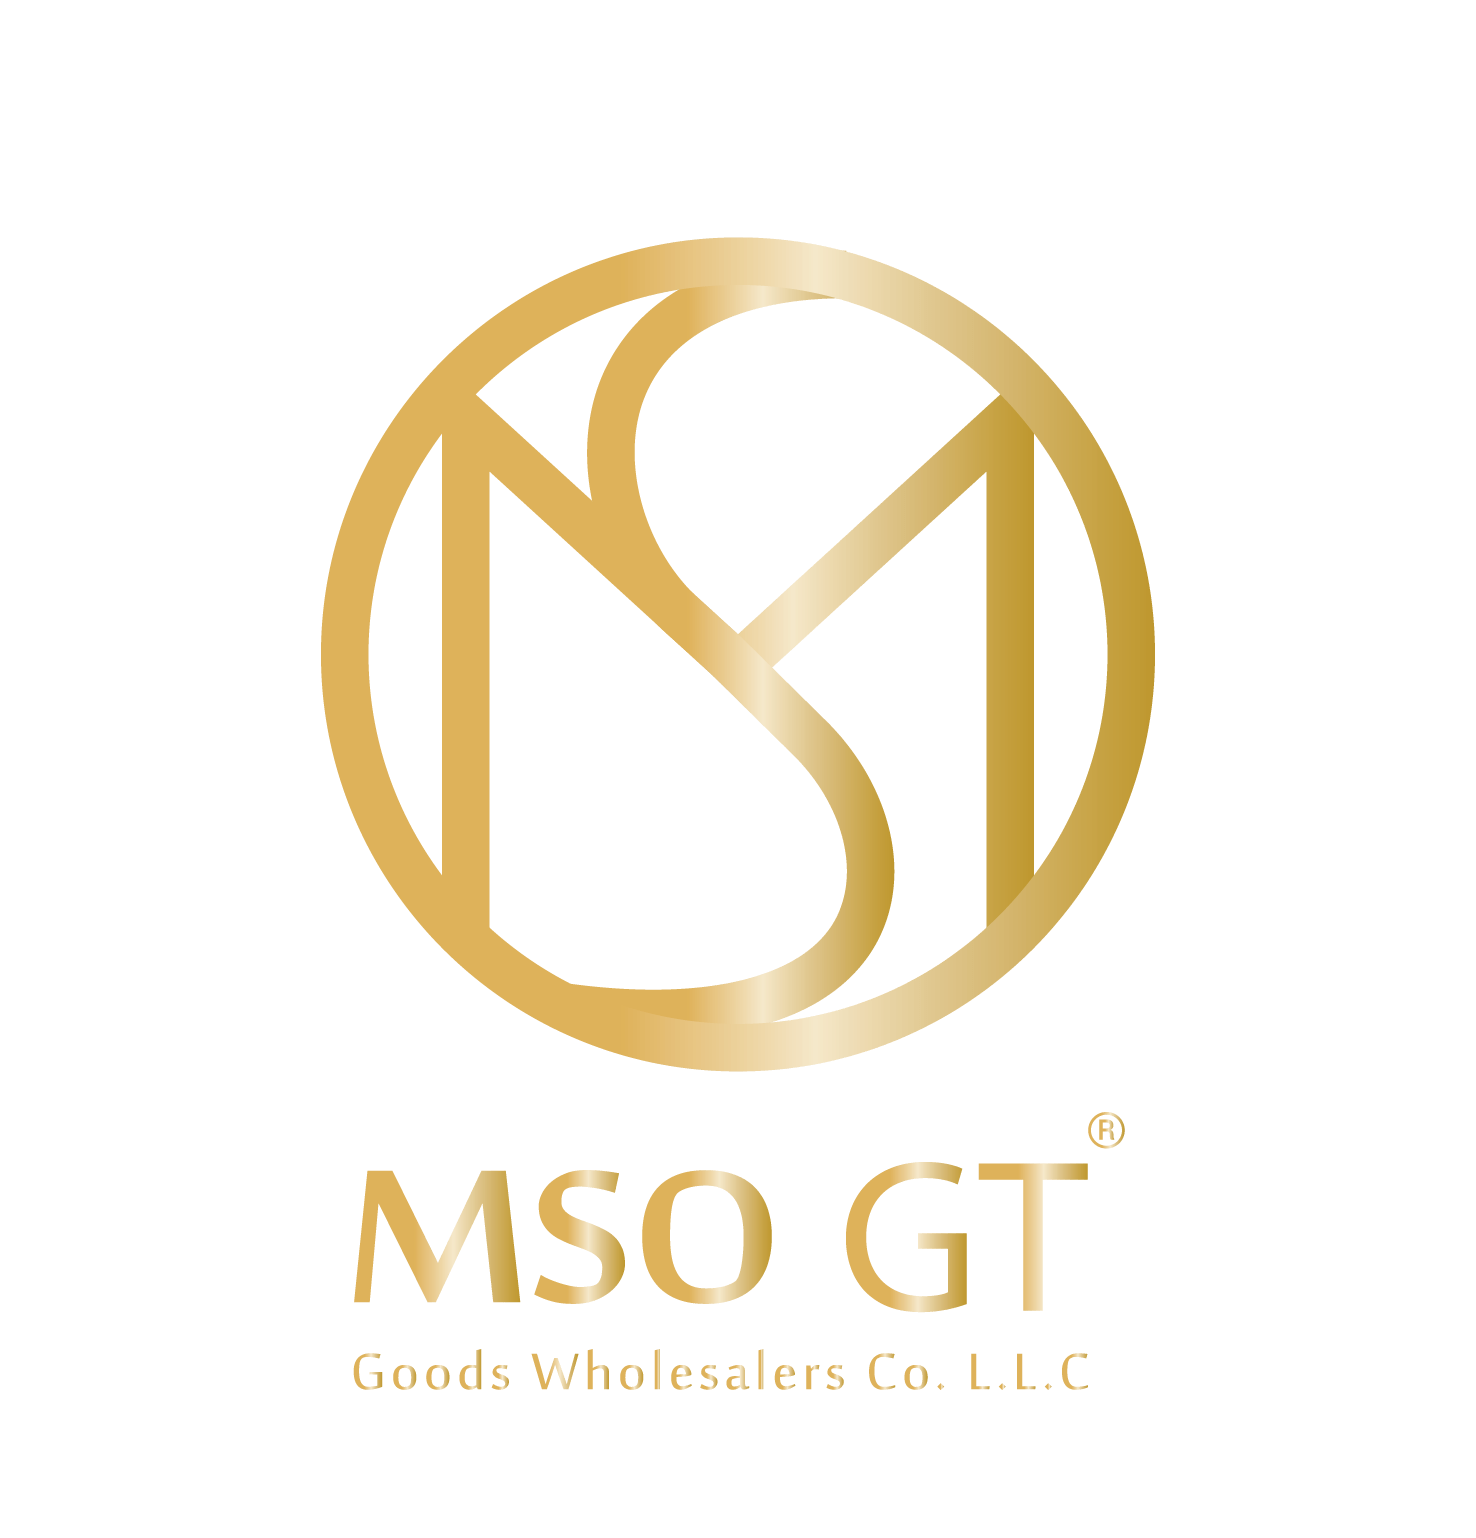 MSO FOR GOODS WHOLESALERS CO.